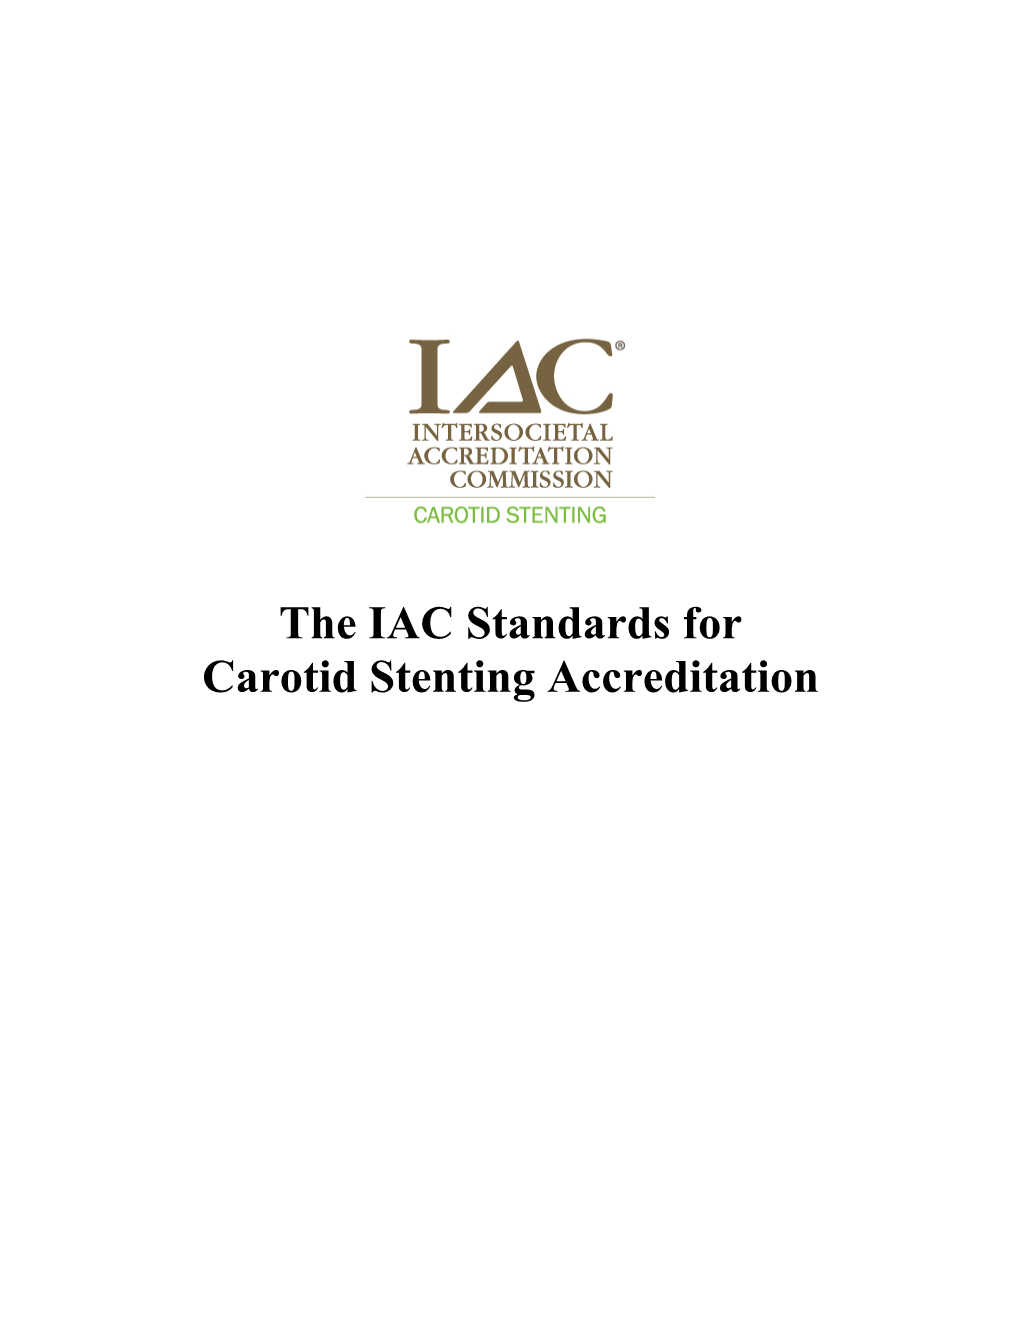 The IAC Standards for Carotid Stenting Accreditation Table of Contents All Entries in Table of Contents Are Linked to the Corresponding Sections